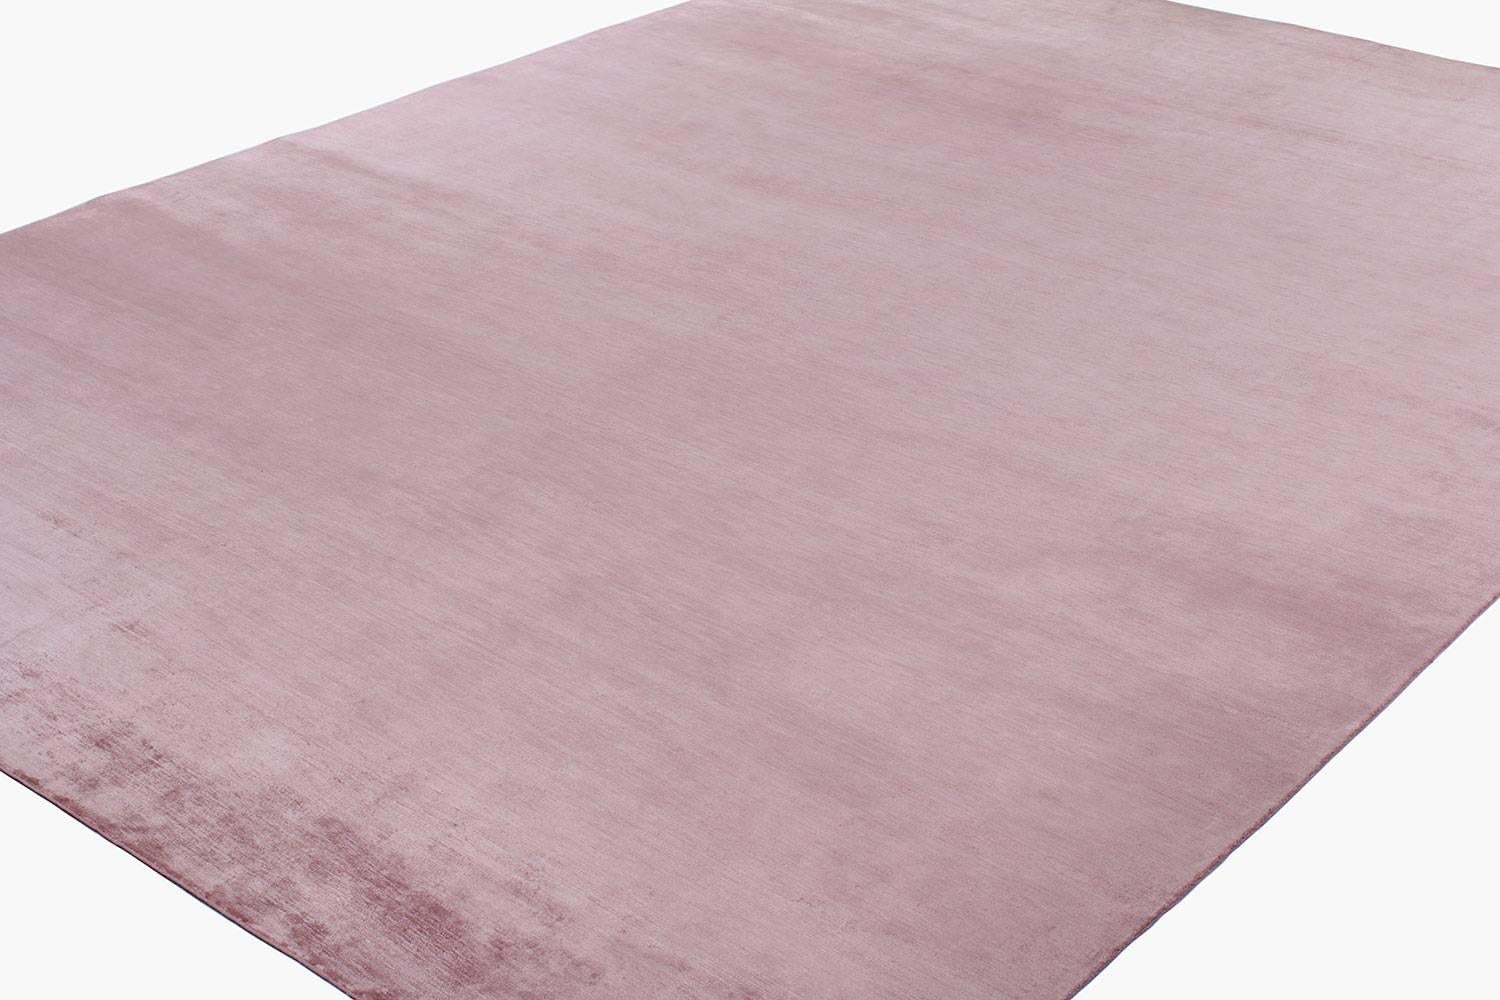 This solid silk carpet is stunningly simple. The powder pink tone was achieved with 100% natural botanical dyes. Featured in the top left corner is a delicate hummingbird, this tiny accent is enchanting. Weaved in a 200 knot count, the pile height